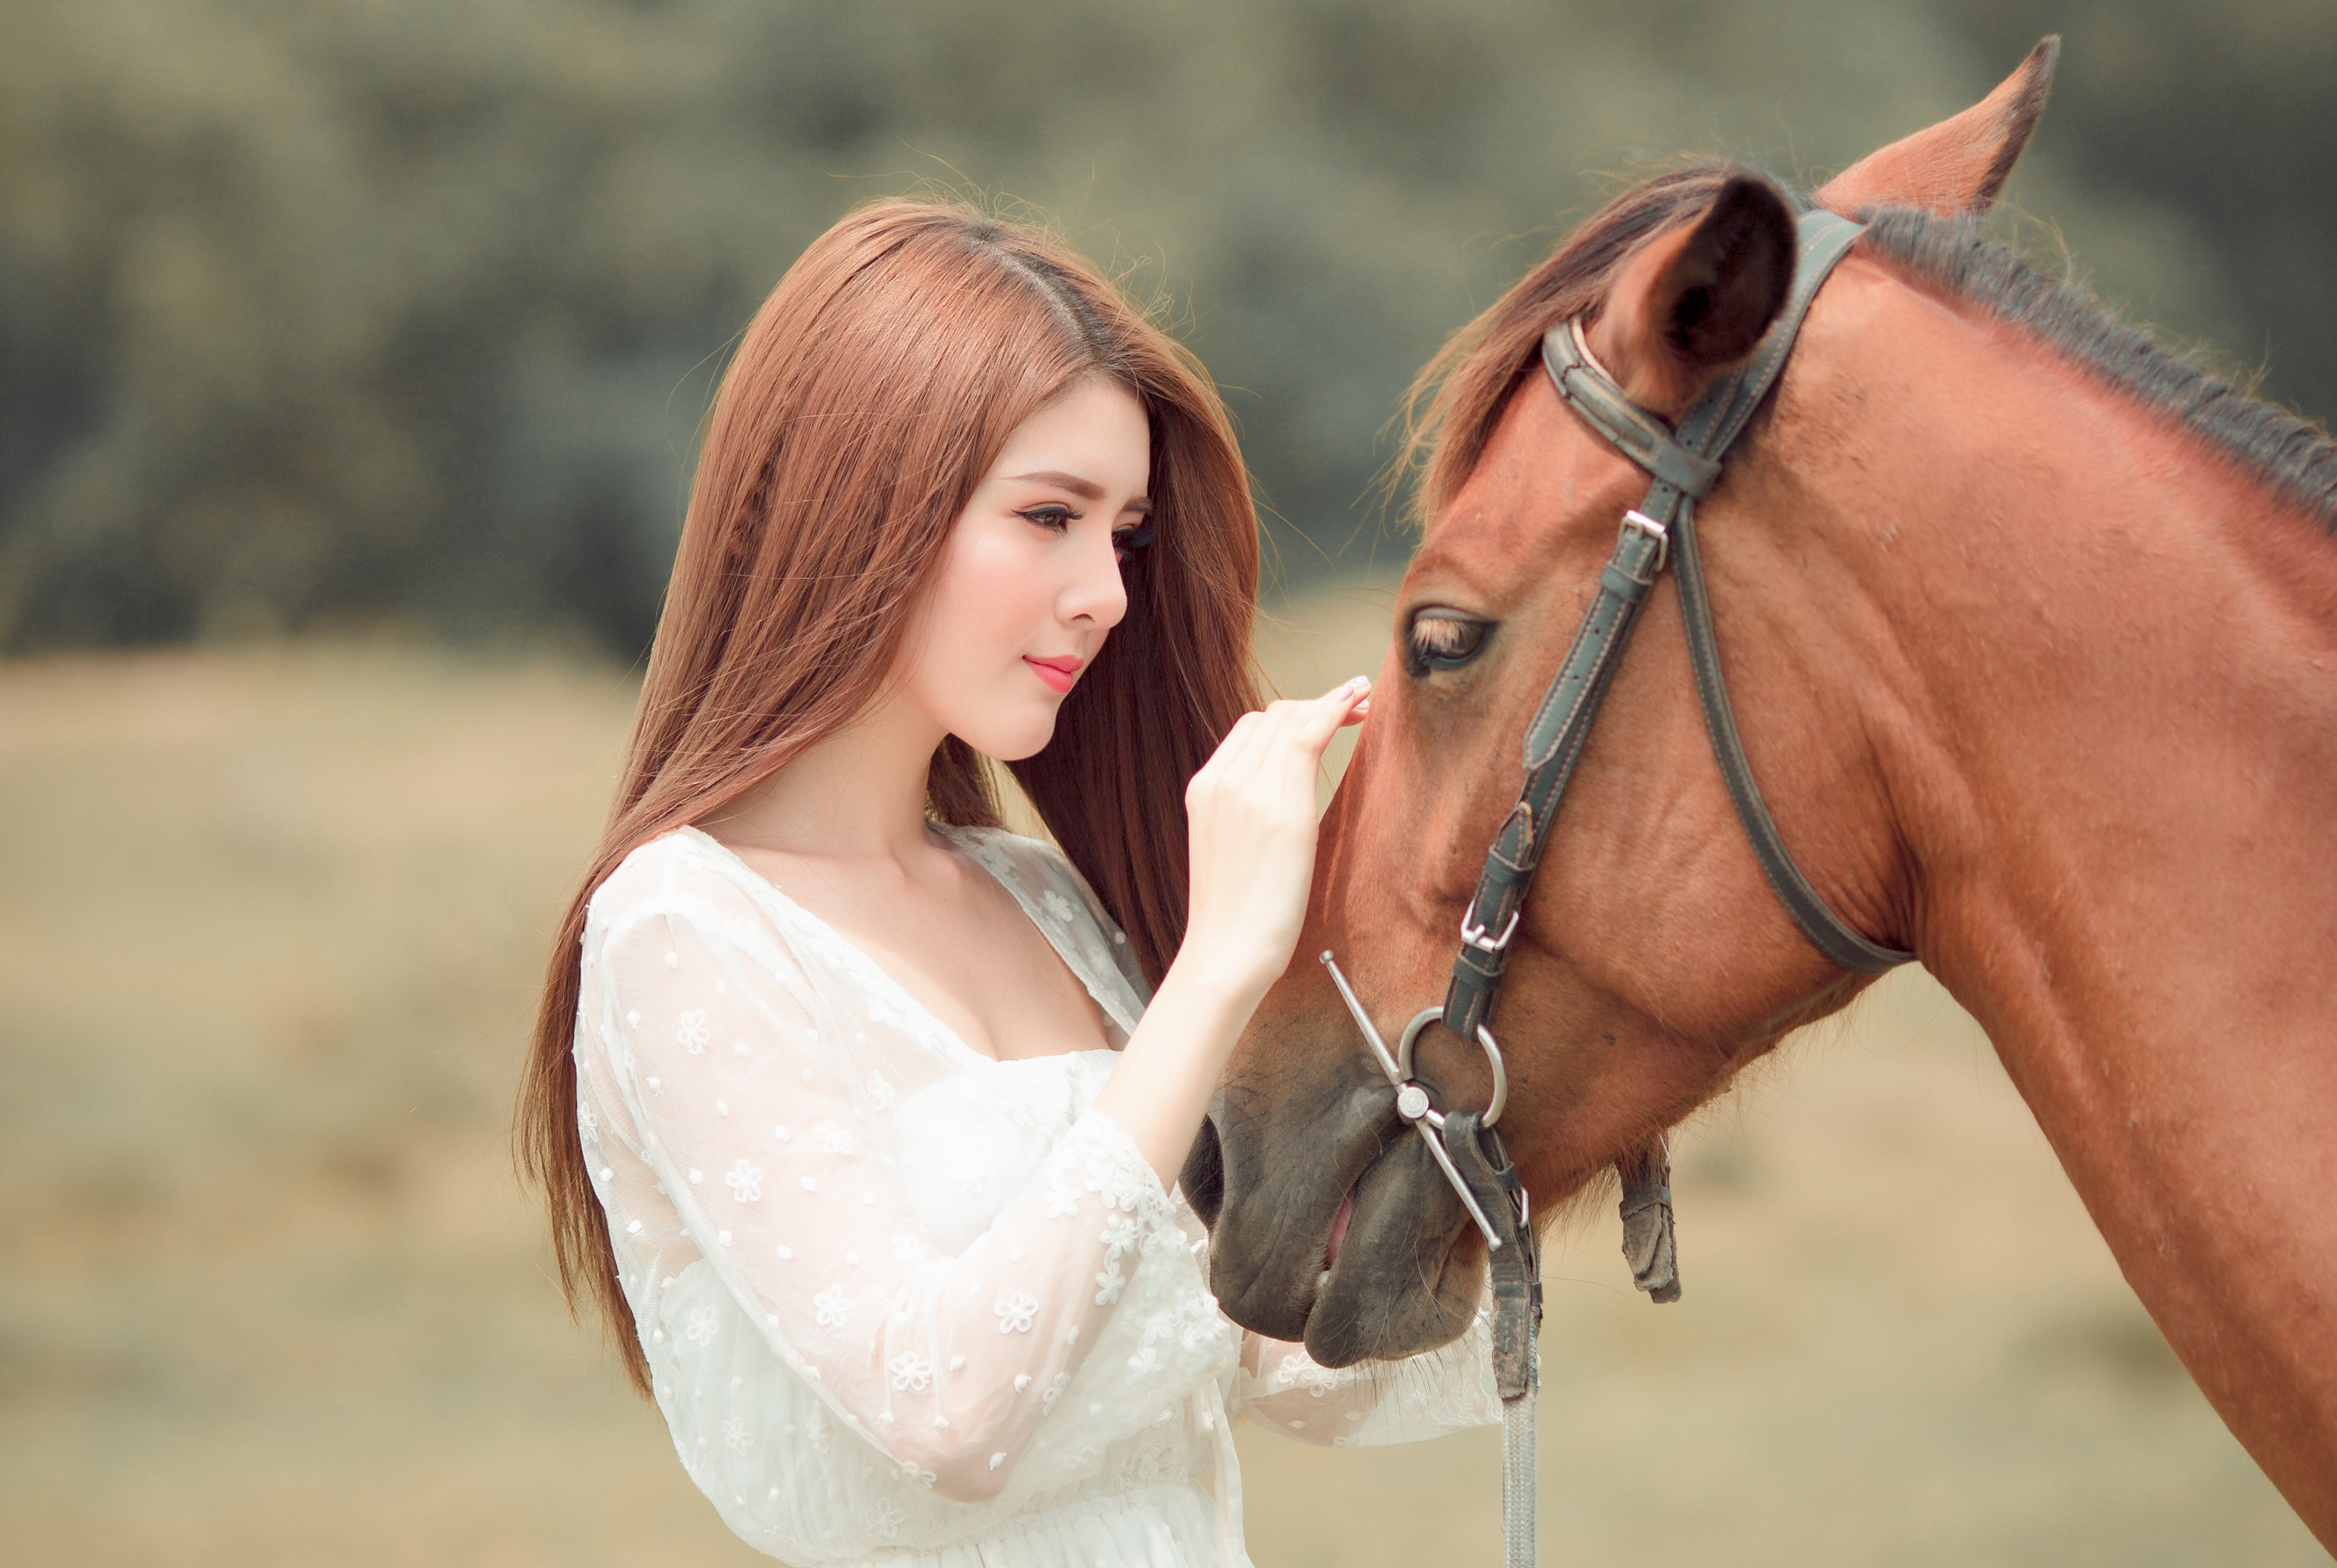 look, face, girl, nature, background, each, horse, sweetheart